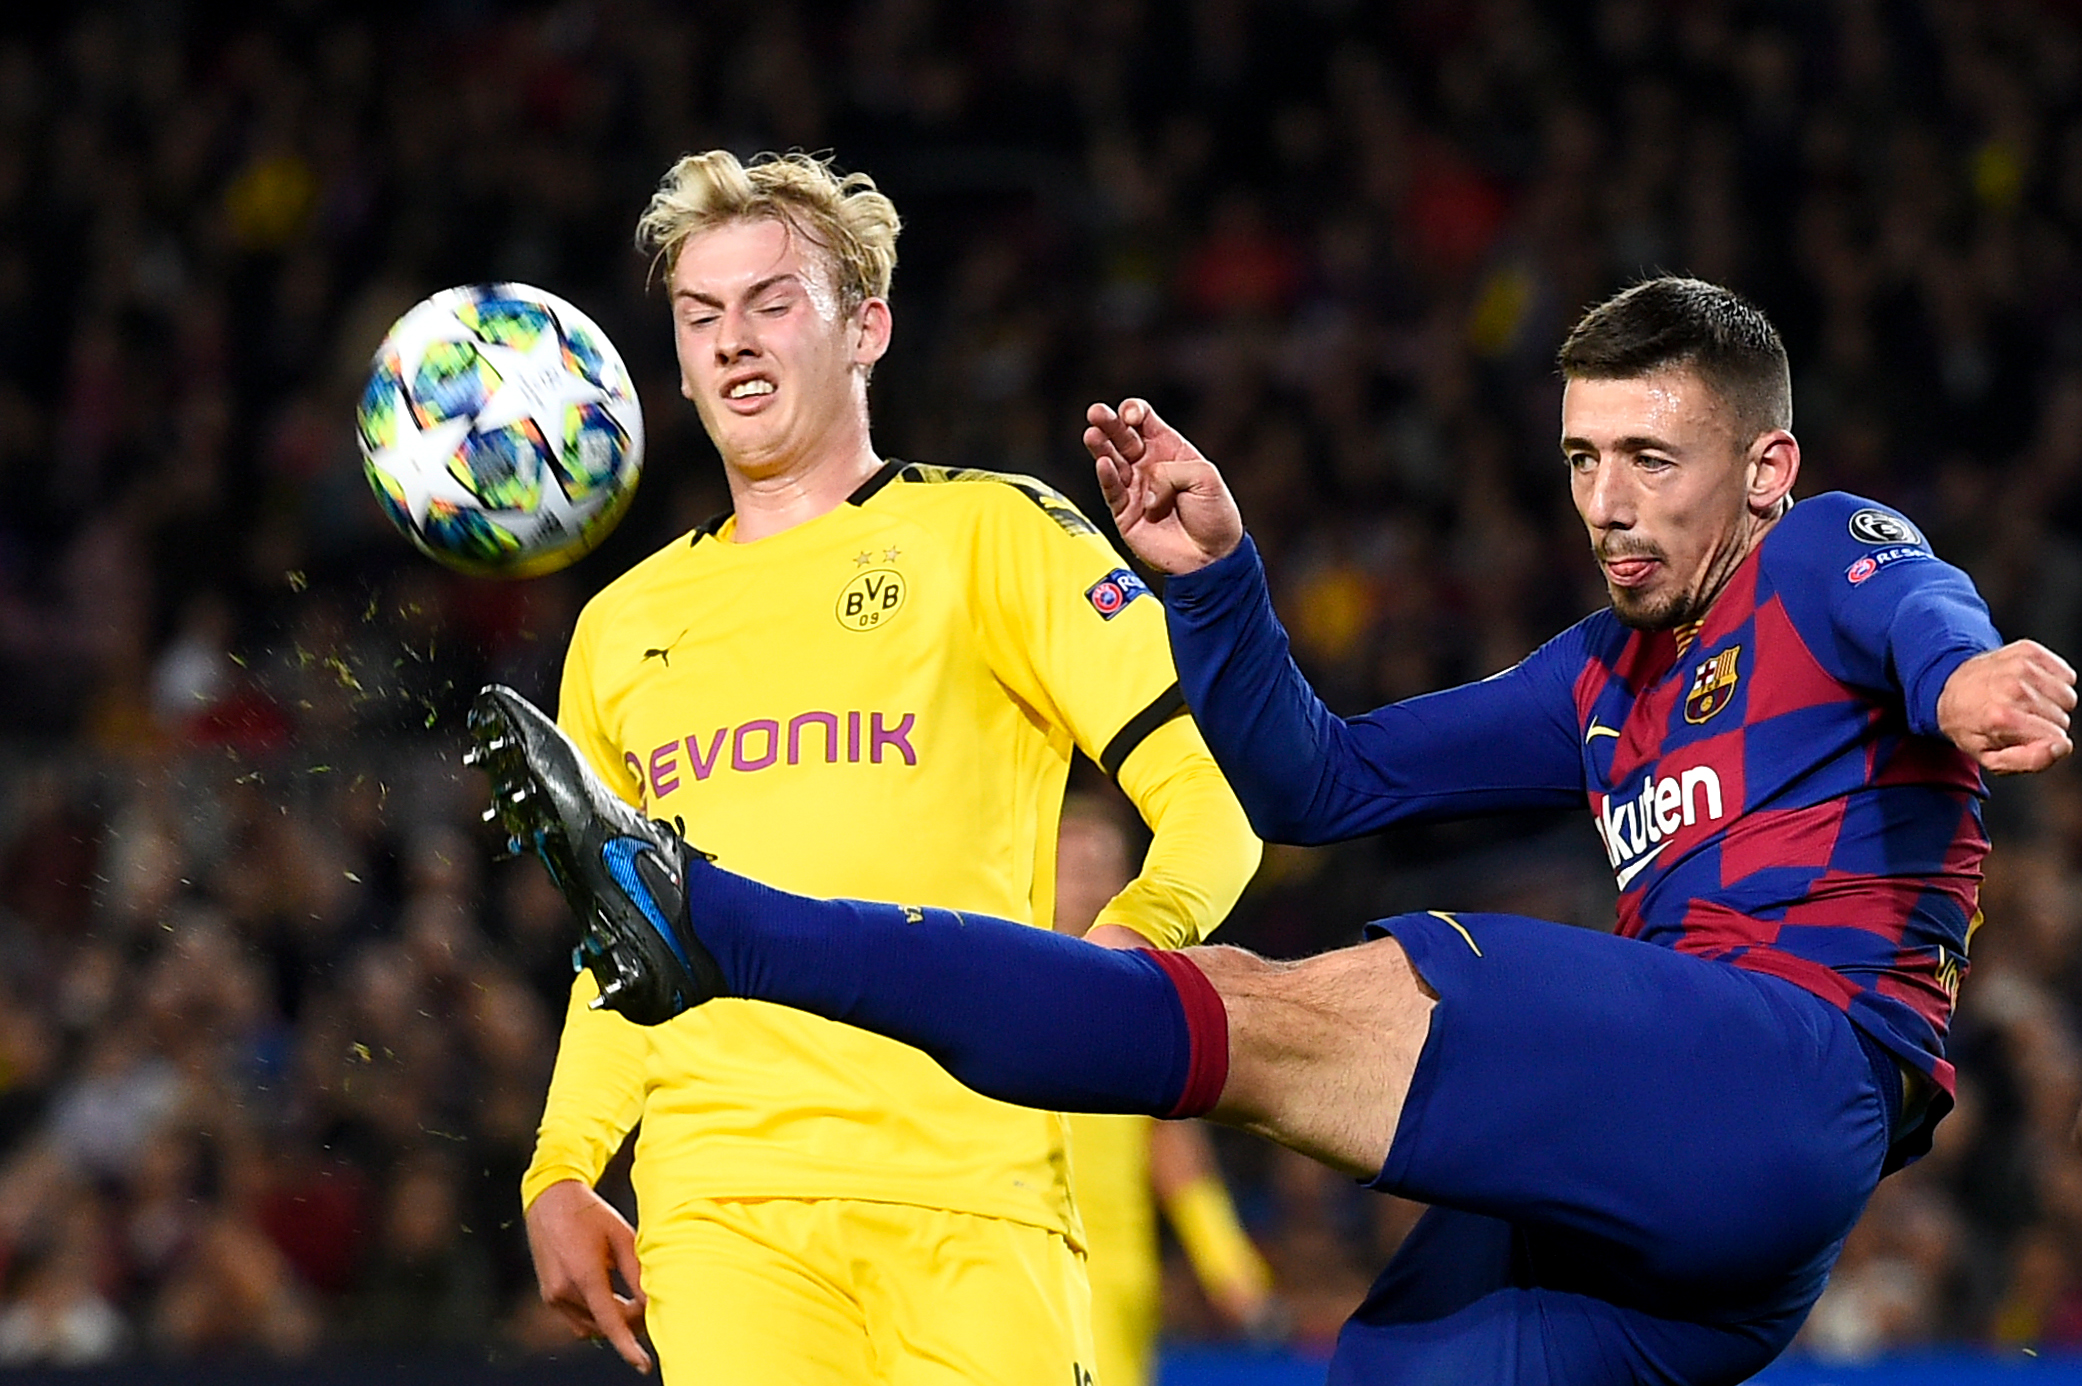 Barcelona's French defender Clement Lenglet (R) kicks the ball next to Dortmund's German forward Julian Brandt during the UEFA Champions League Group F football match between FC Barcelona and Borussia Dortmund at the Camp Nou stadium in Barcelona, on November 27, 2019. (Photo by Josep LAGO / AFP) (Photo by JOSEP LAGO/AFP via Getty Images)